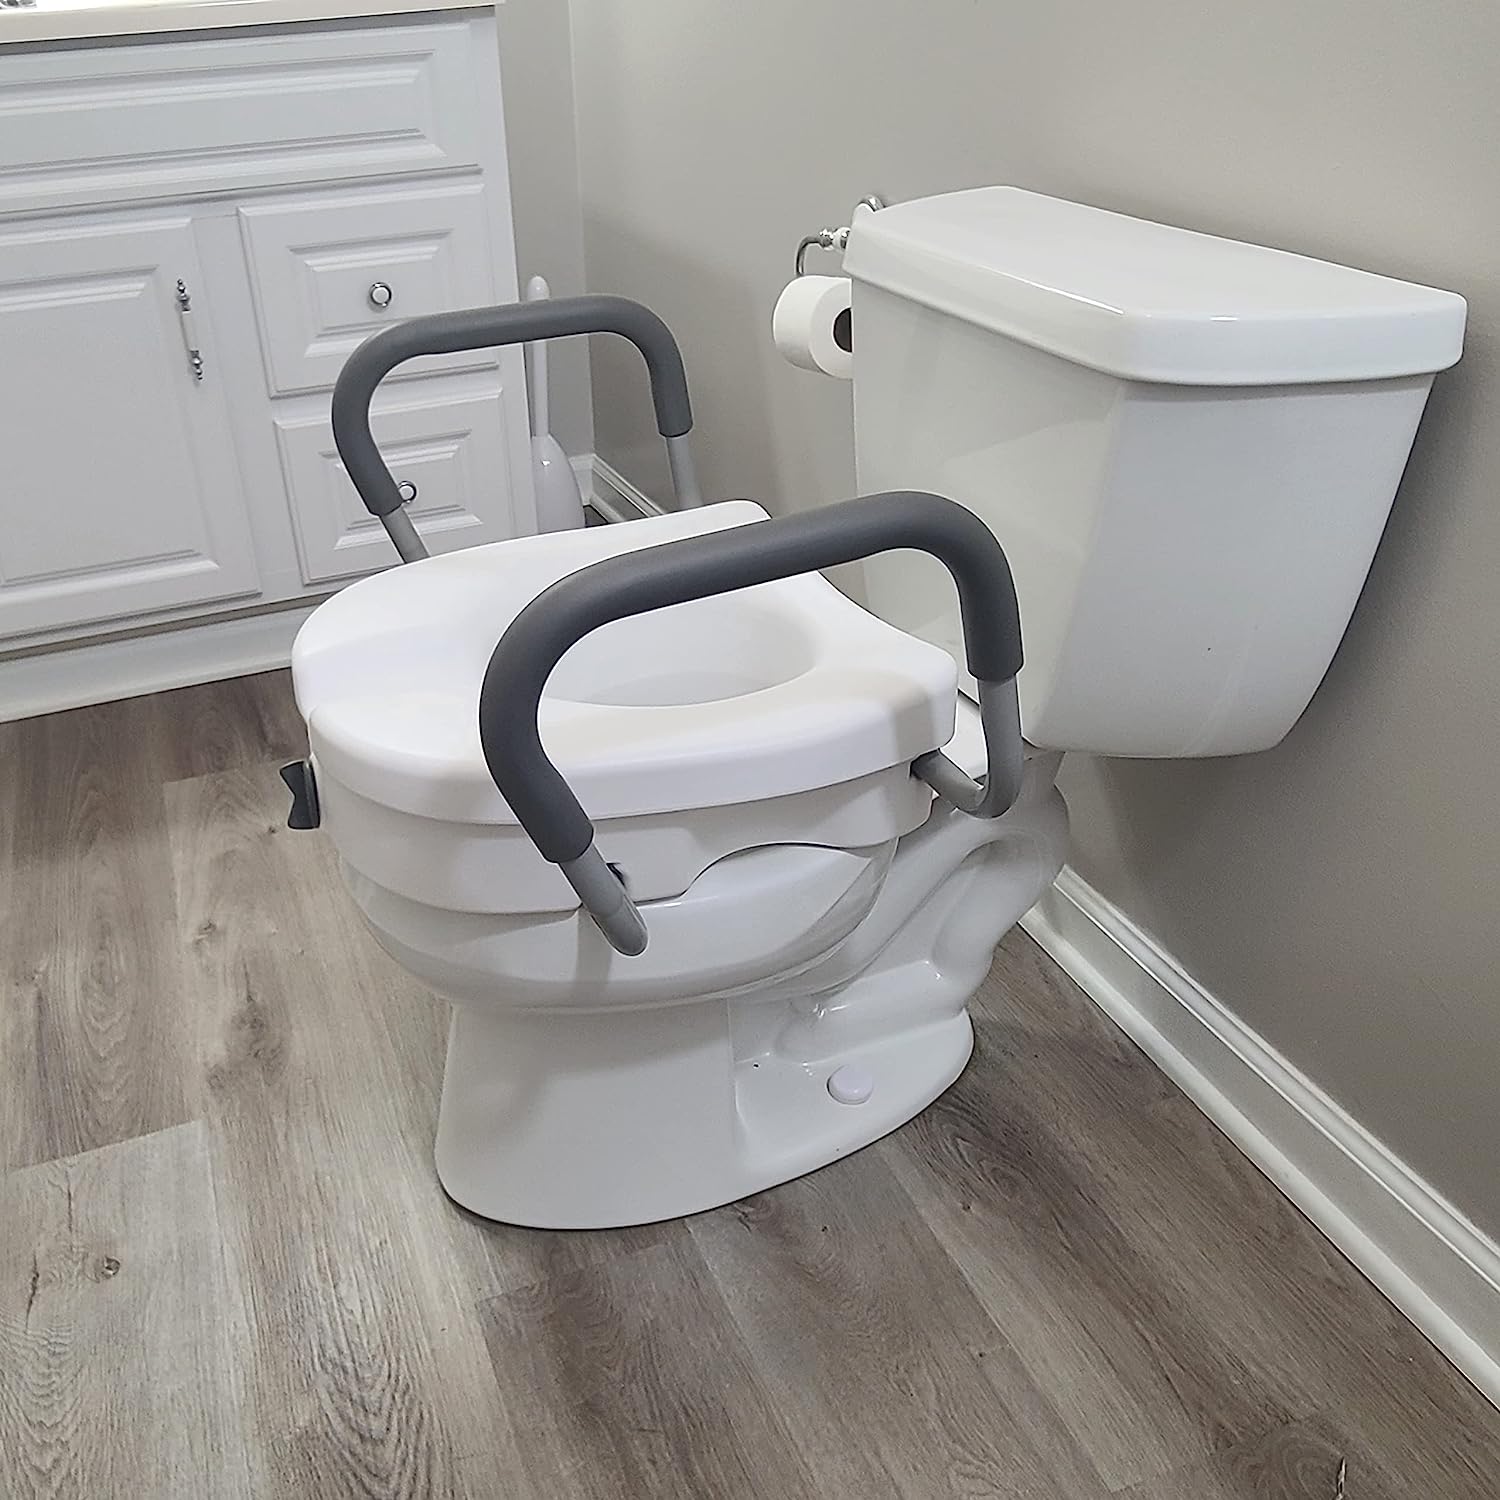 Carex E-Z Lock™ Locking Raised Toilet Seat with Armrests - Carex Health Brands